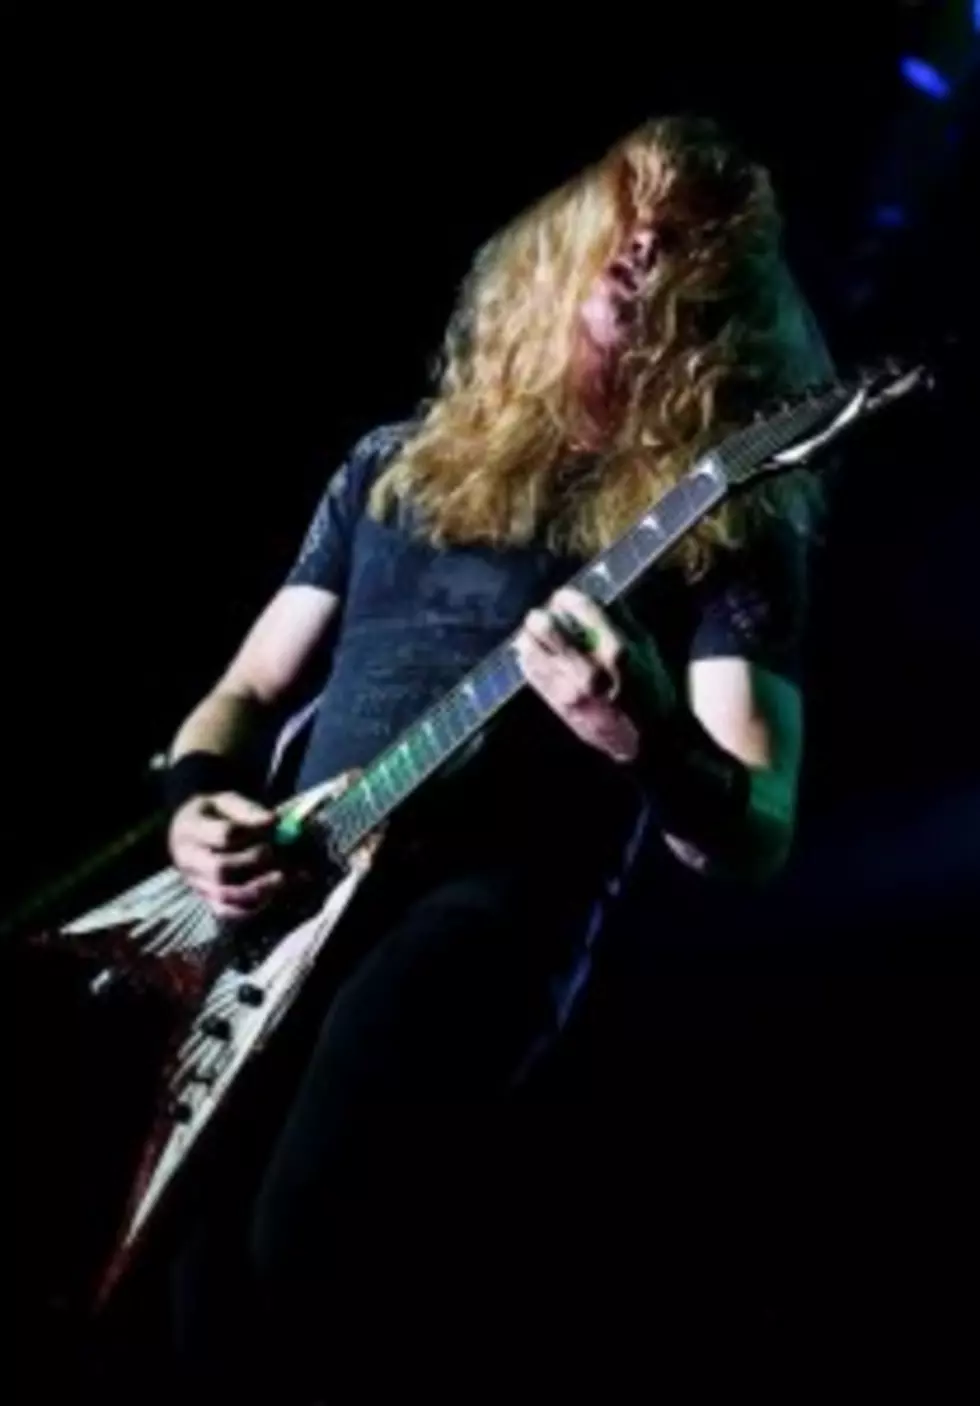 Be On The Lookout For Dave Mustaine Playing A Metallica Tune With Jason Newsted